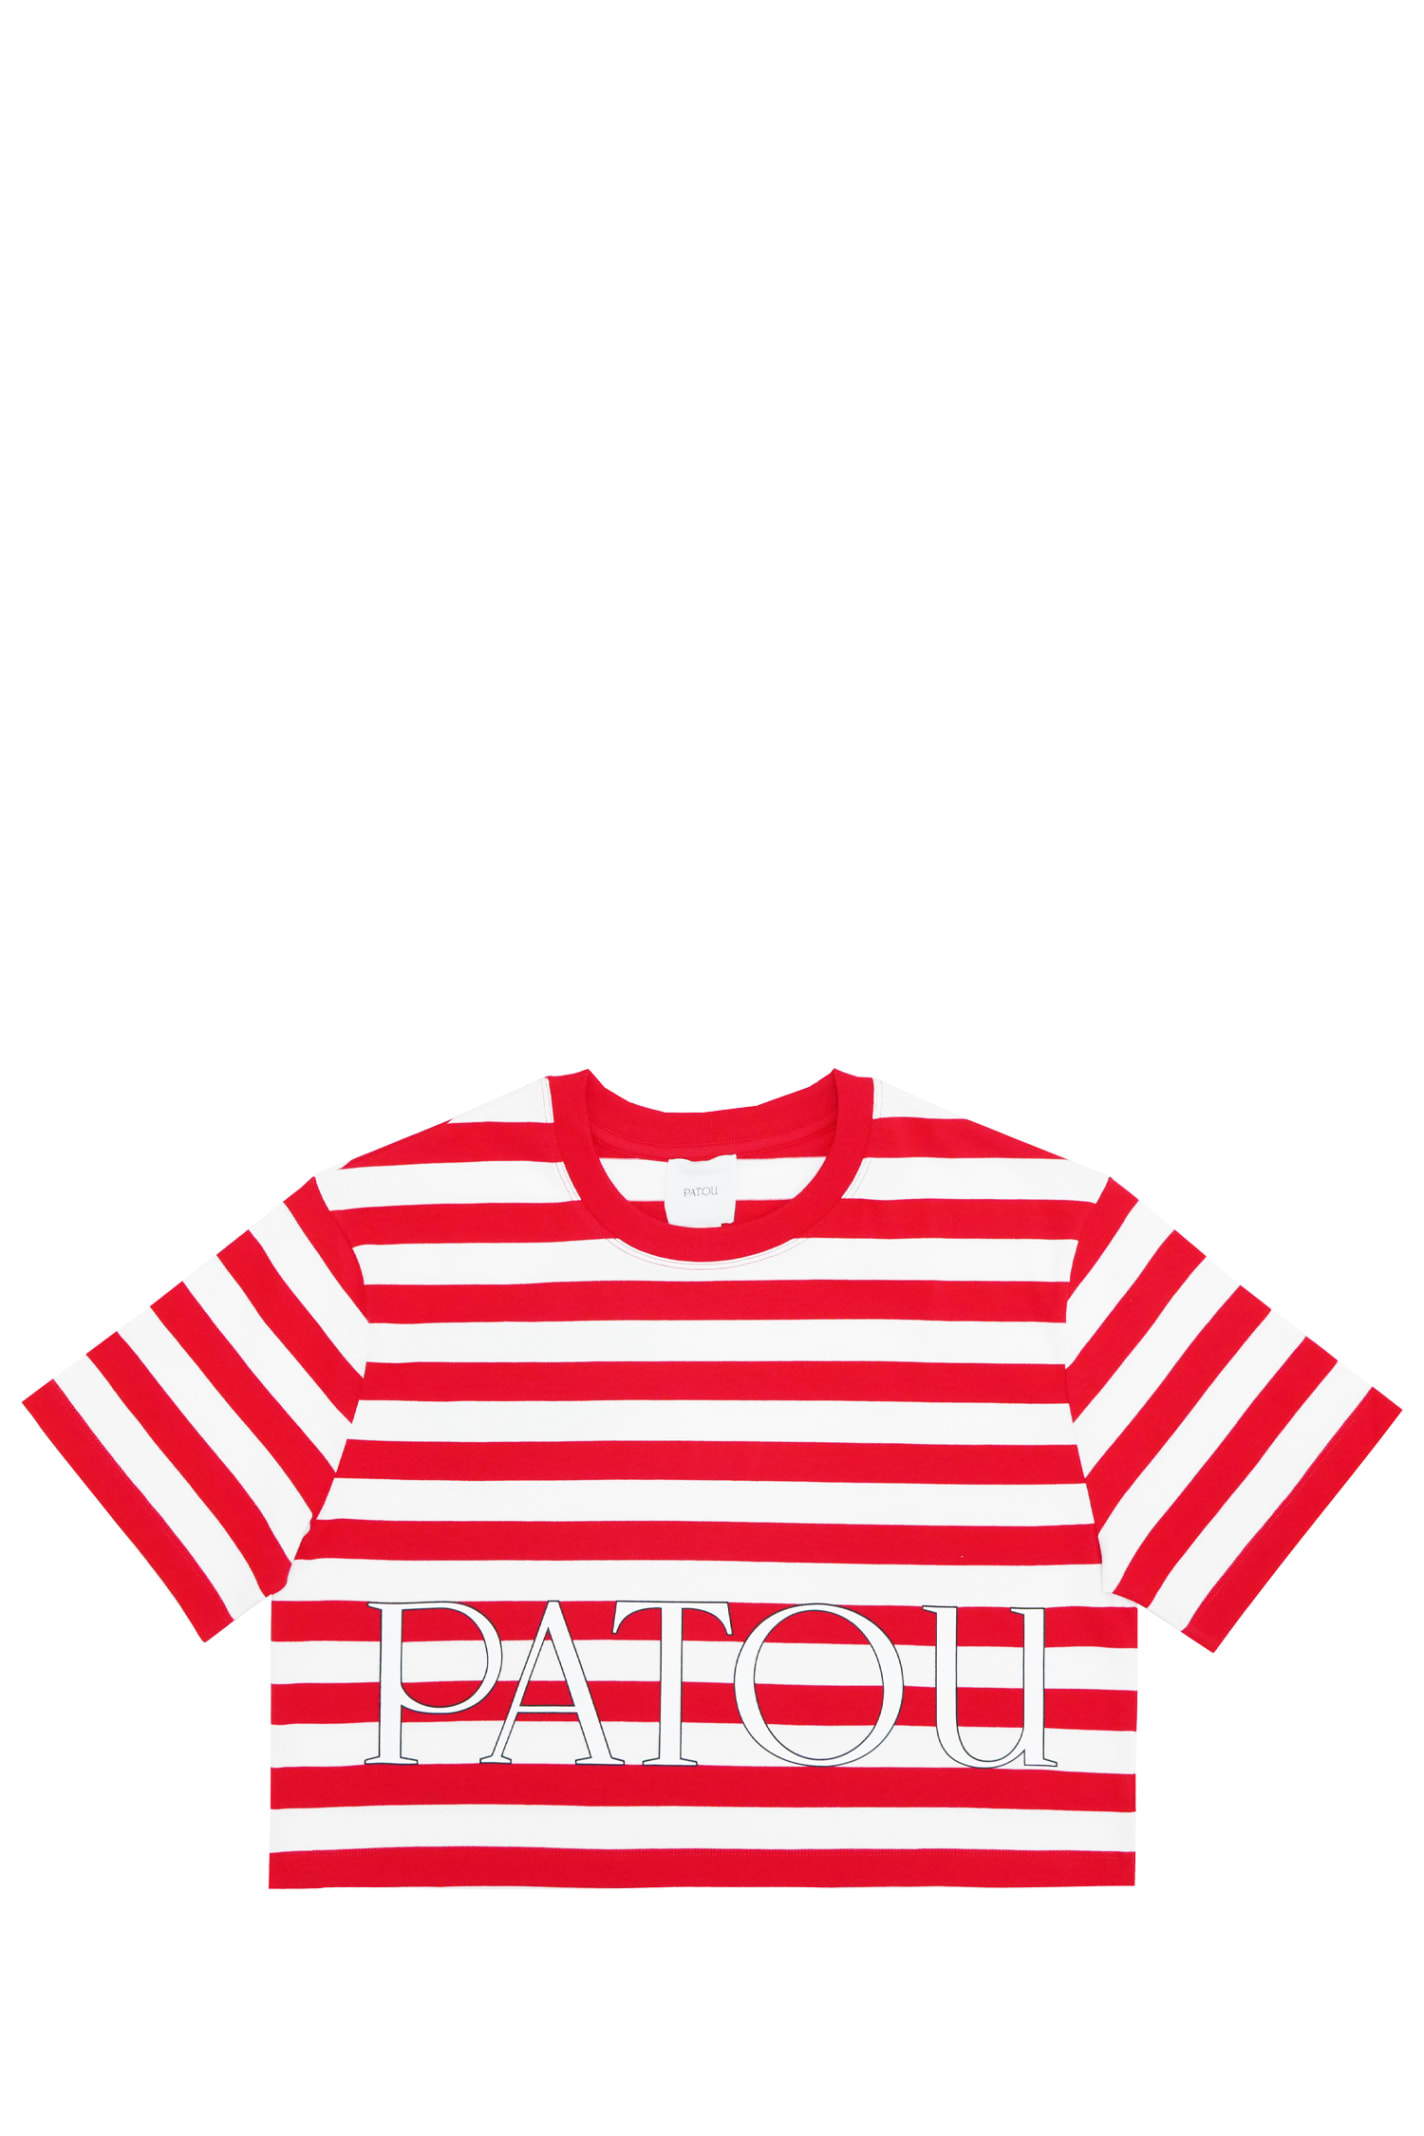 Patou T-shirt In Red